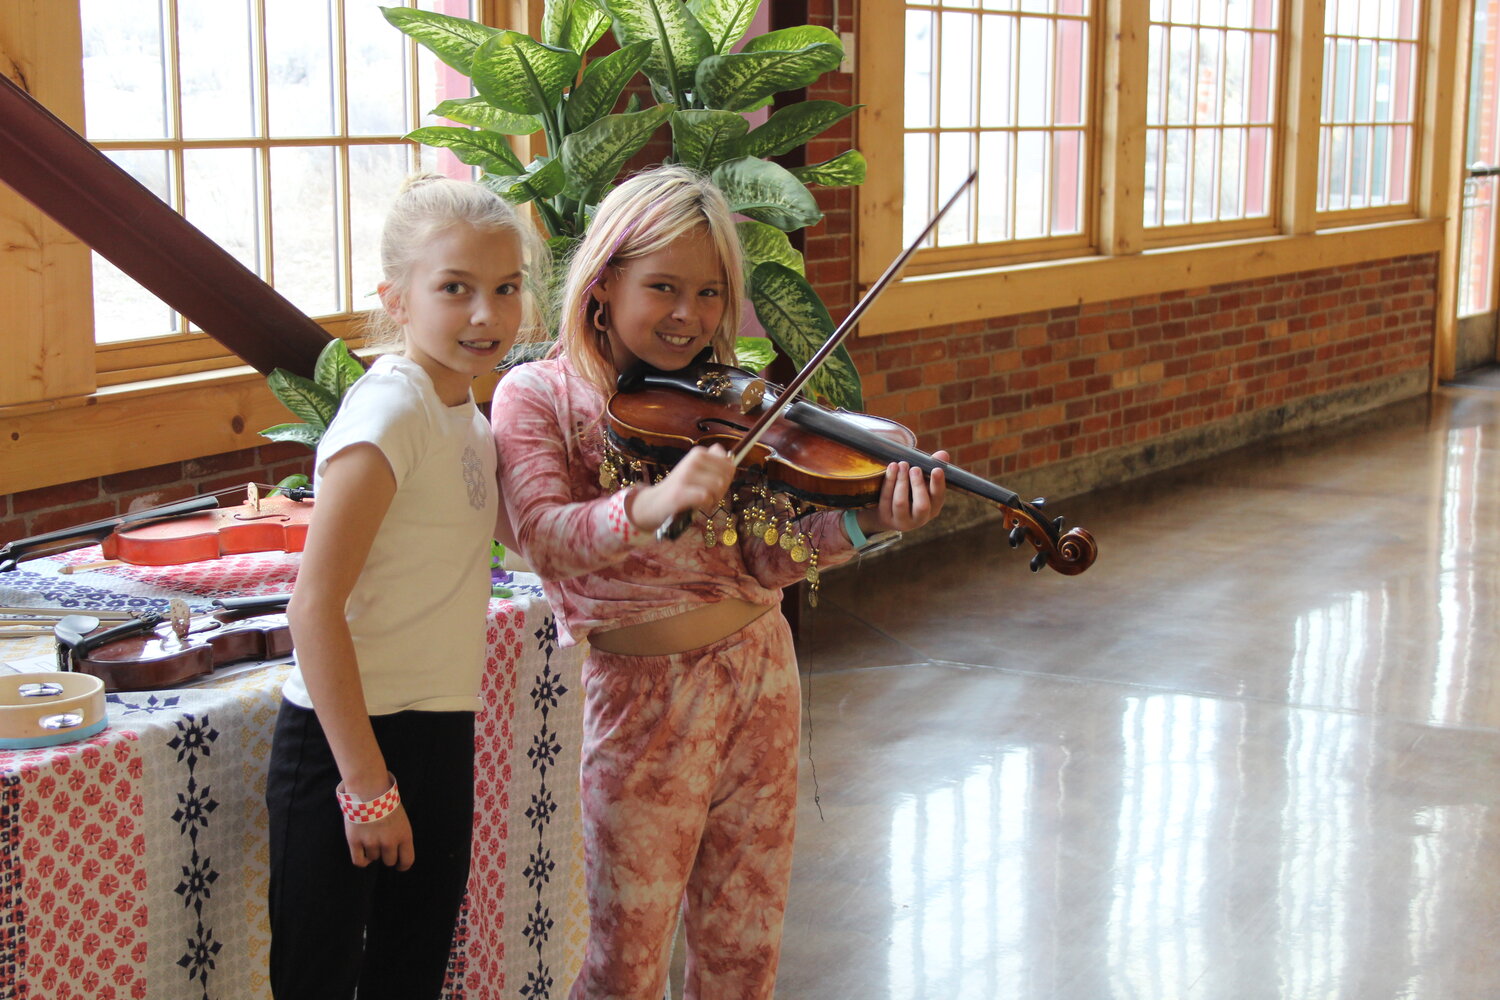 Rylee Shafton-Segura and Vivienne Lash try out the musical instruments at the Music Petting Zoo table in the Roundhouse during the annual Ceili at the Roundhouse Celtic Festival, held March 22-23.